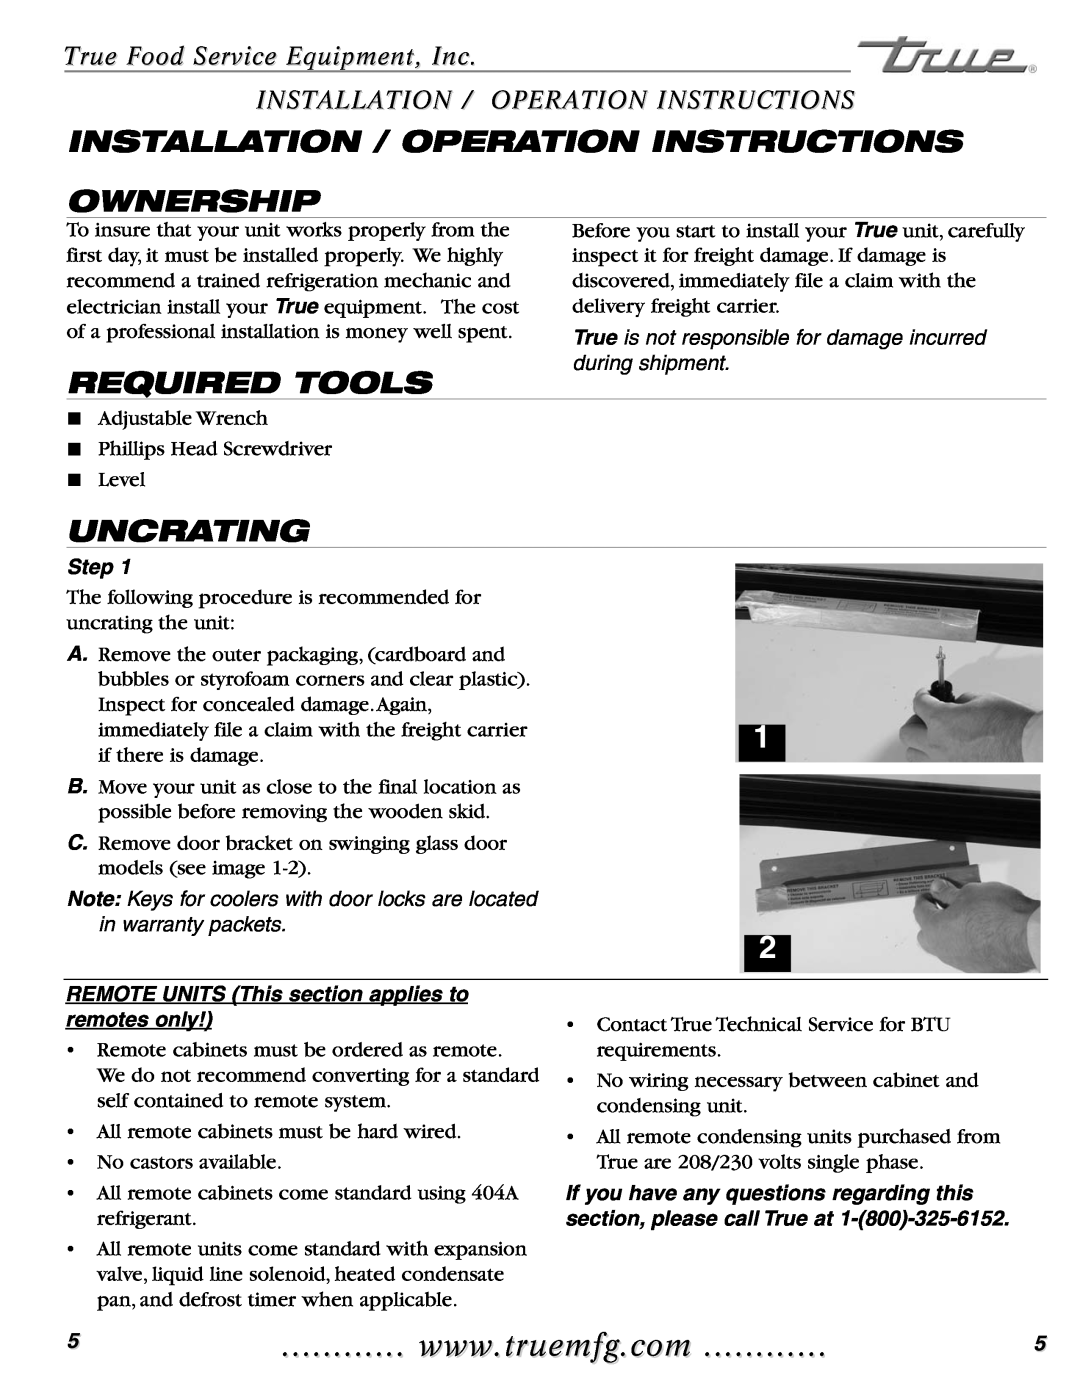 True Manufacturing Company GDIM-26NT Installation / Operation Instructions Ownership, Required Tools, Uncrating, Step 